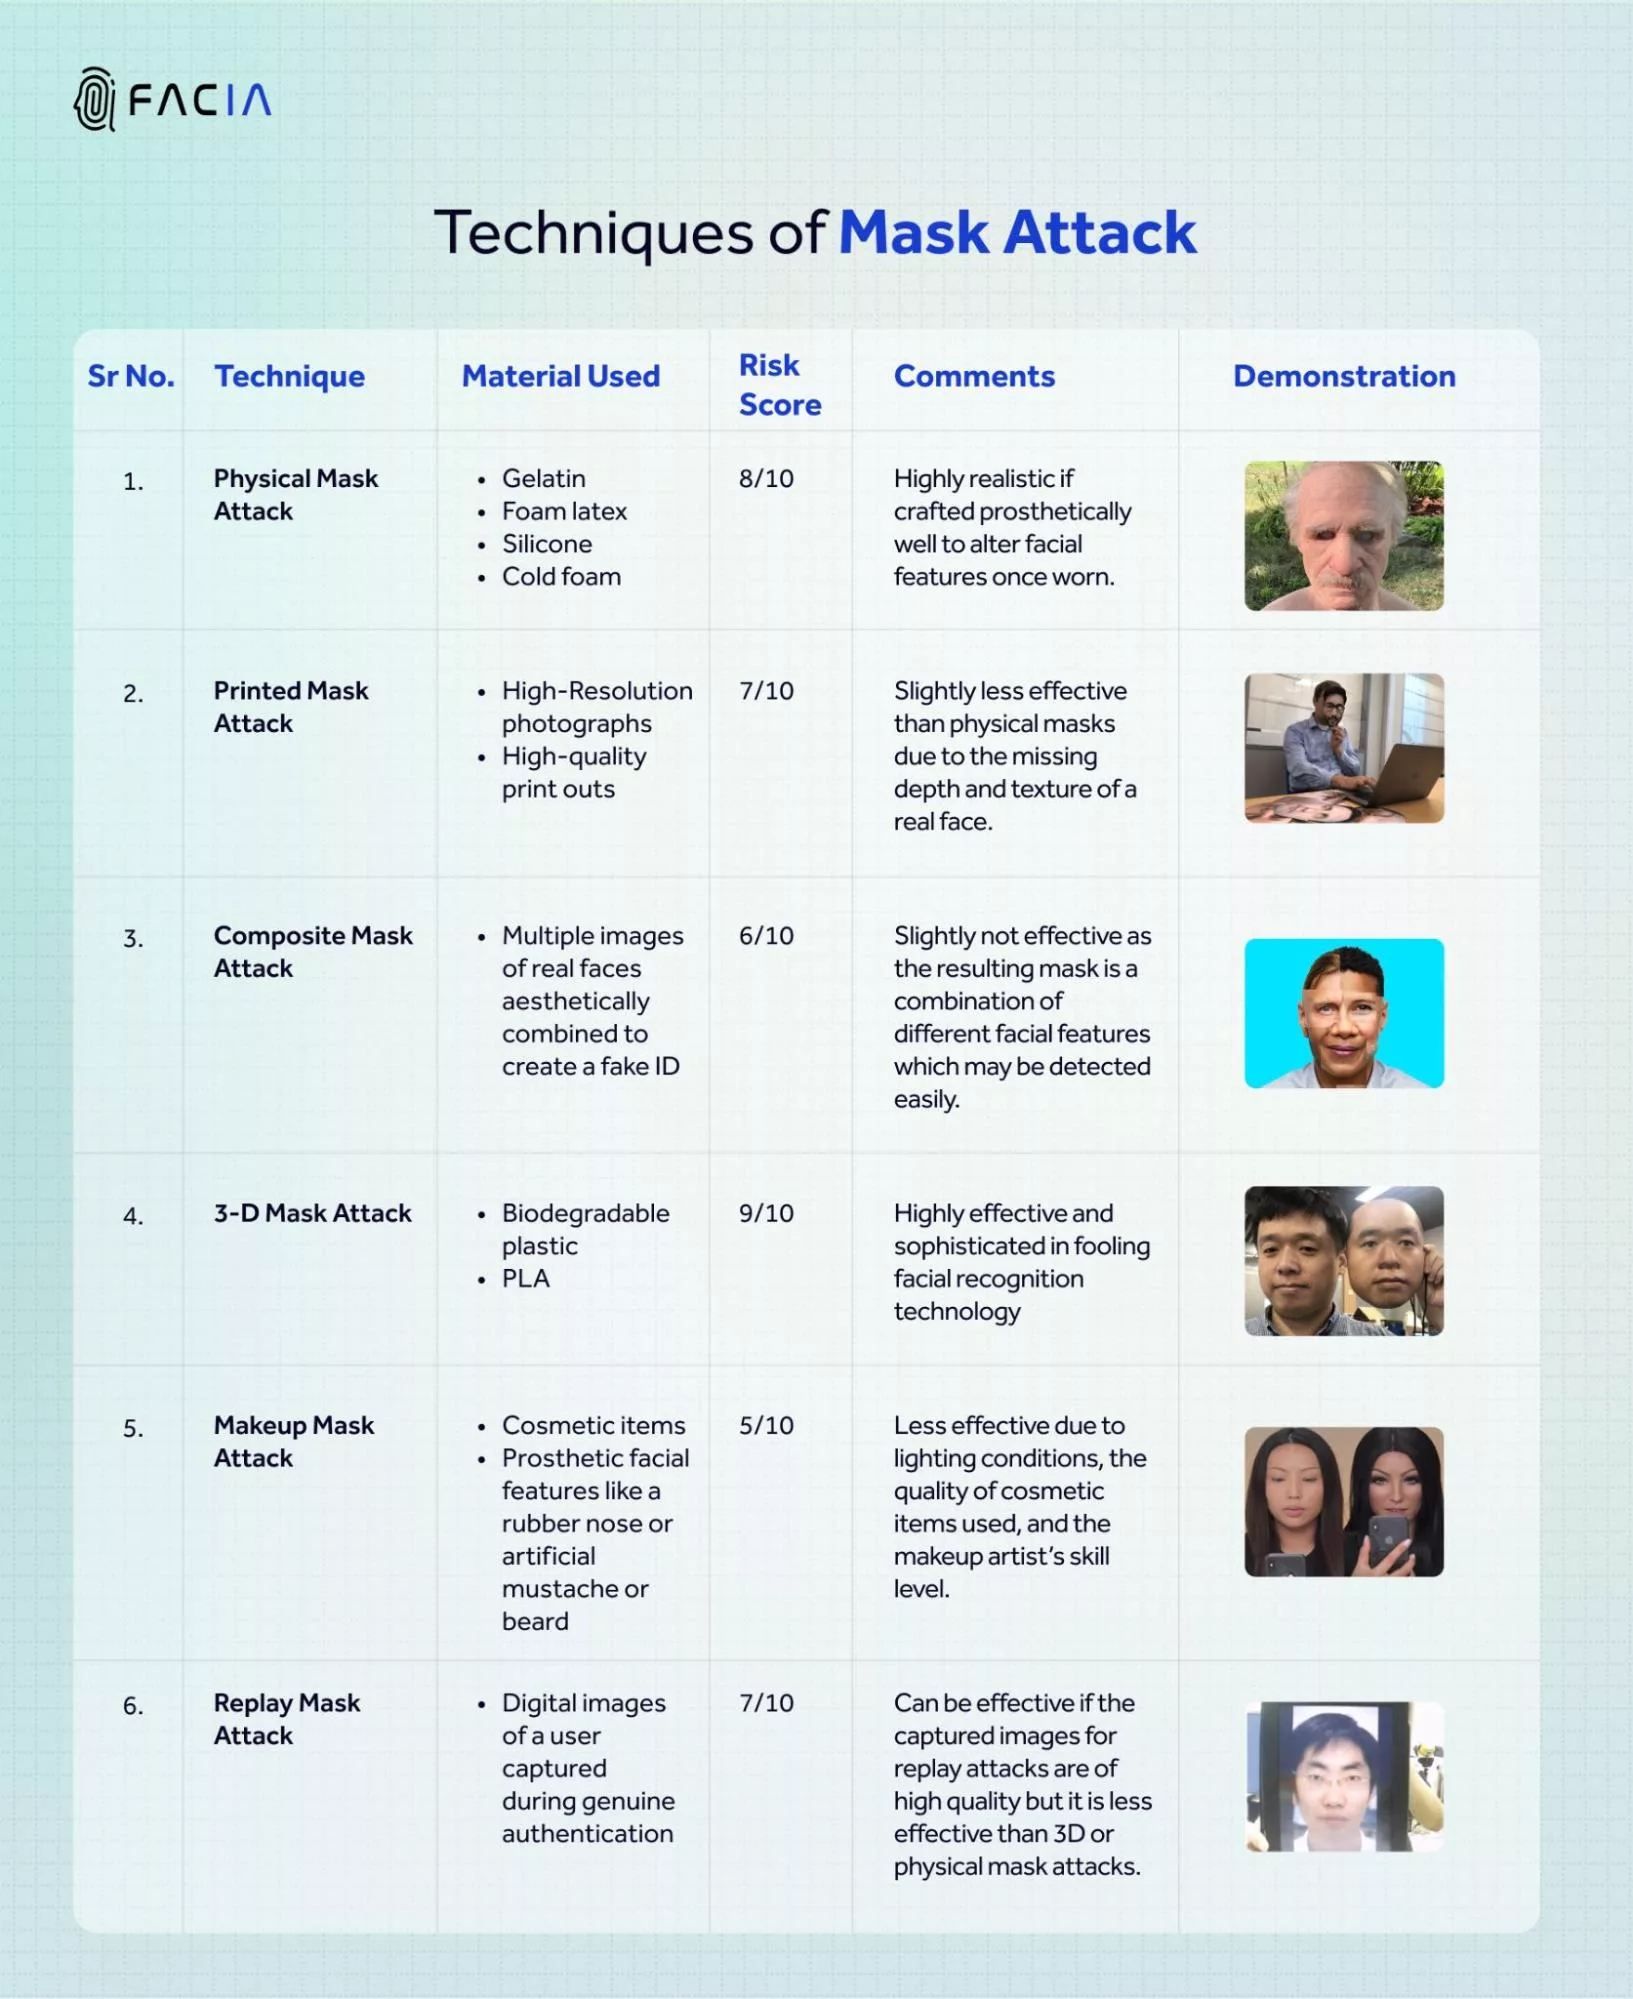 The tabular chart shows a detailed explanation of 6 techniques used for Mask Attacks in facial recognition.